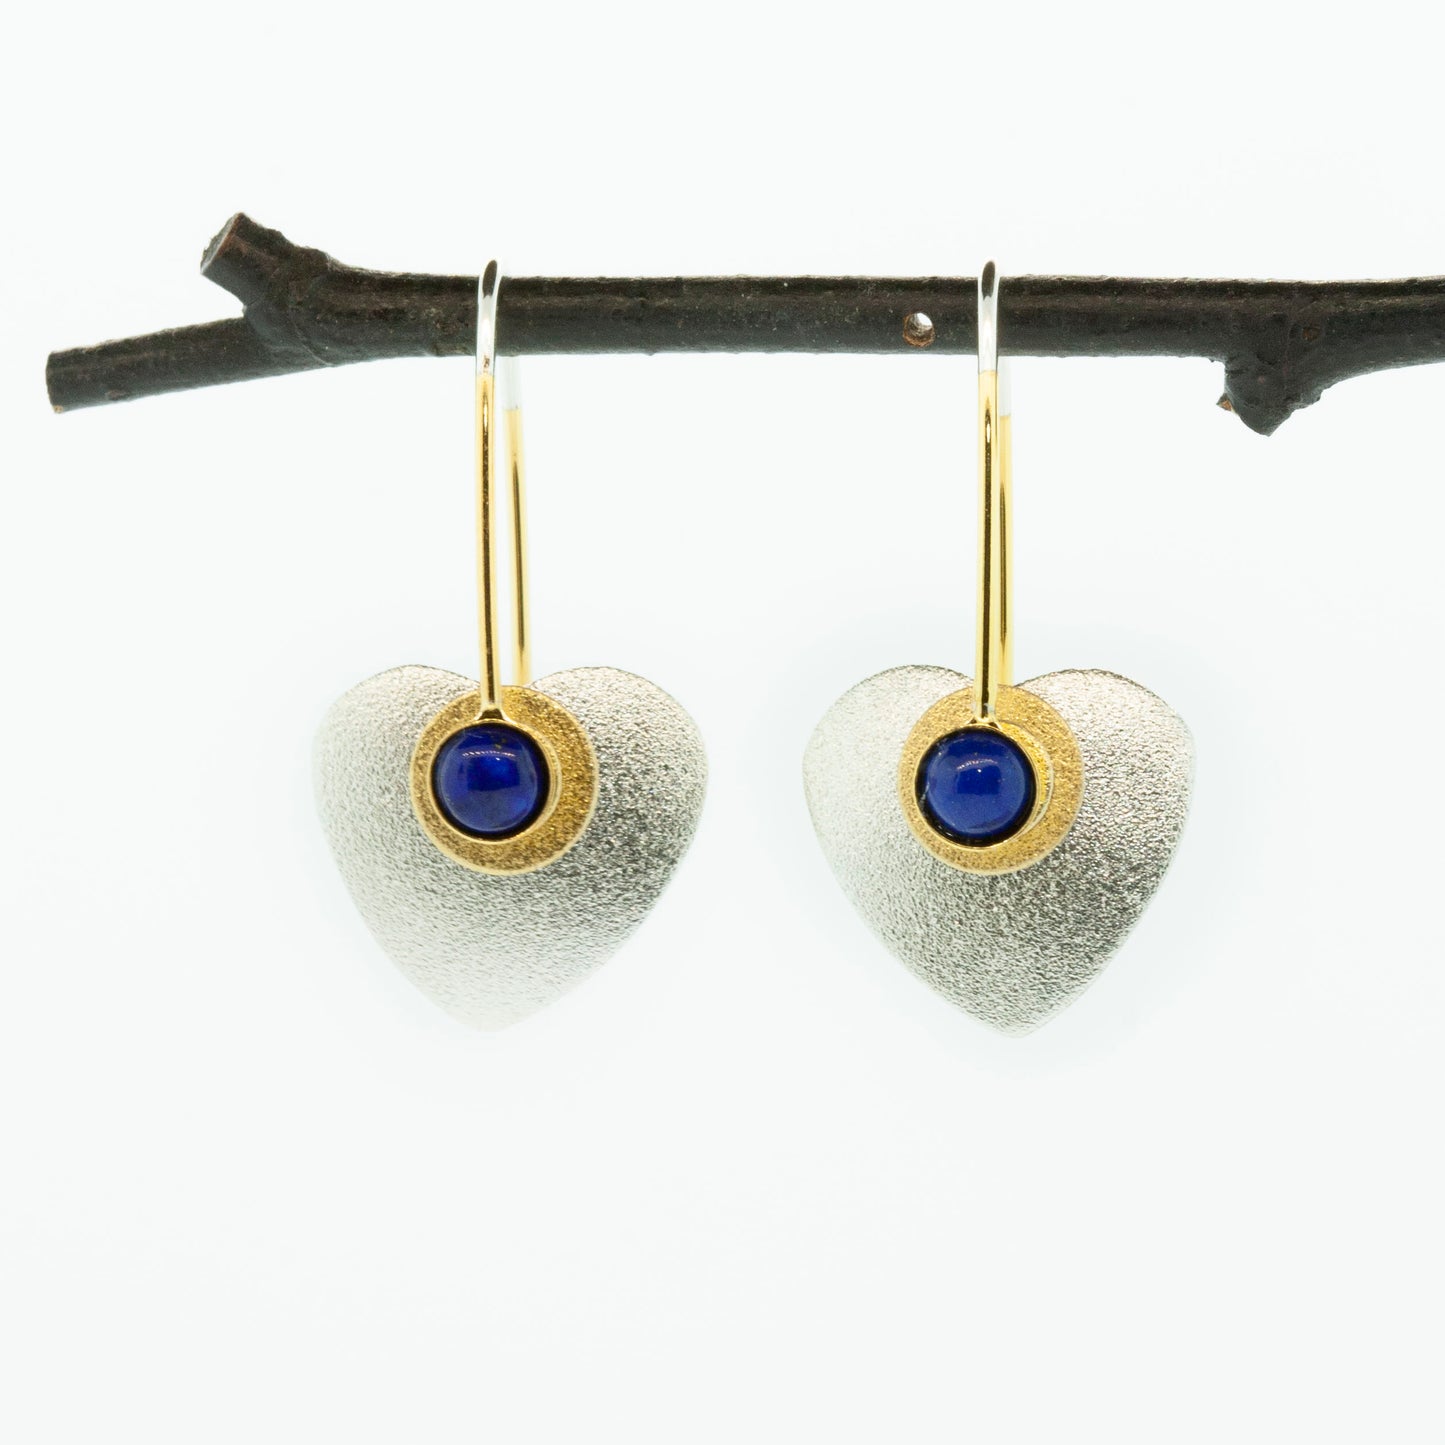 Tiny Heart Earrings--Donation to Domestic Violence Services